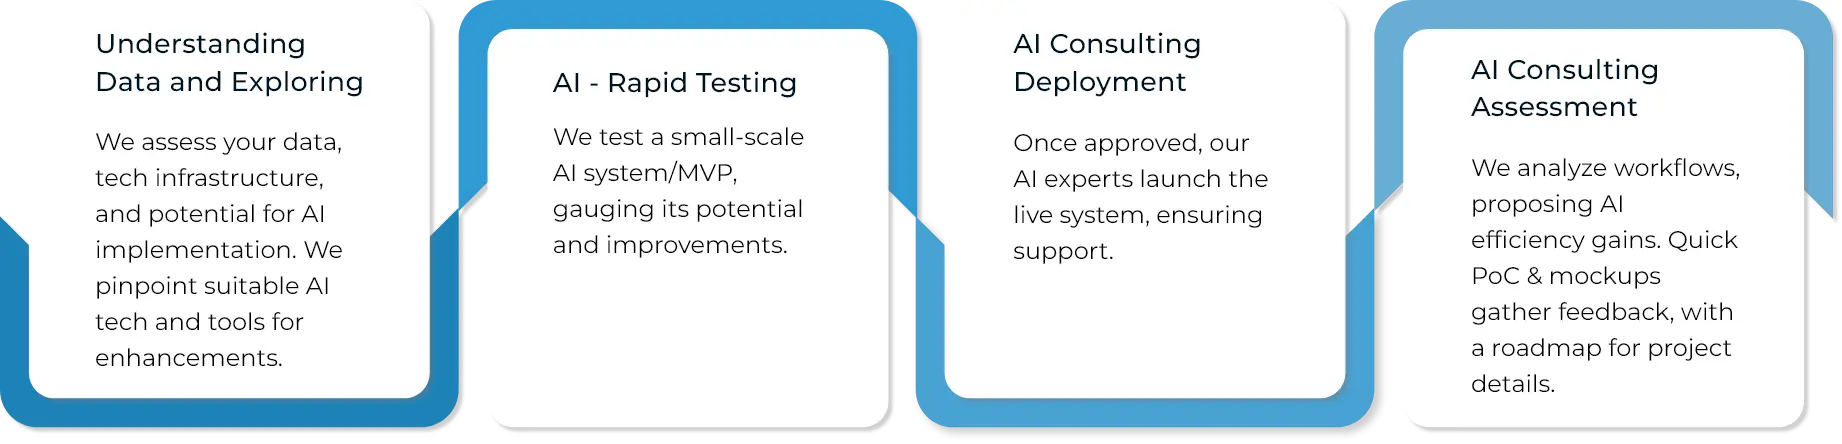 Our-Approach-to-AI-Consulting